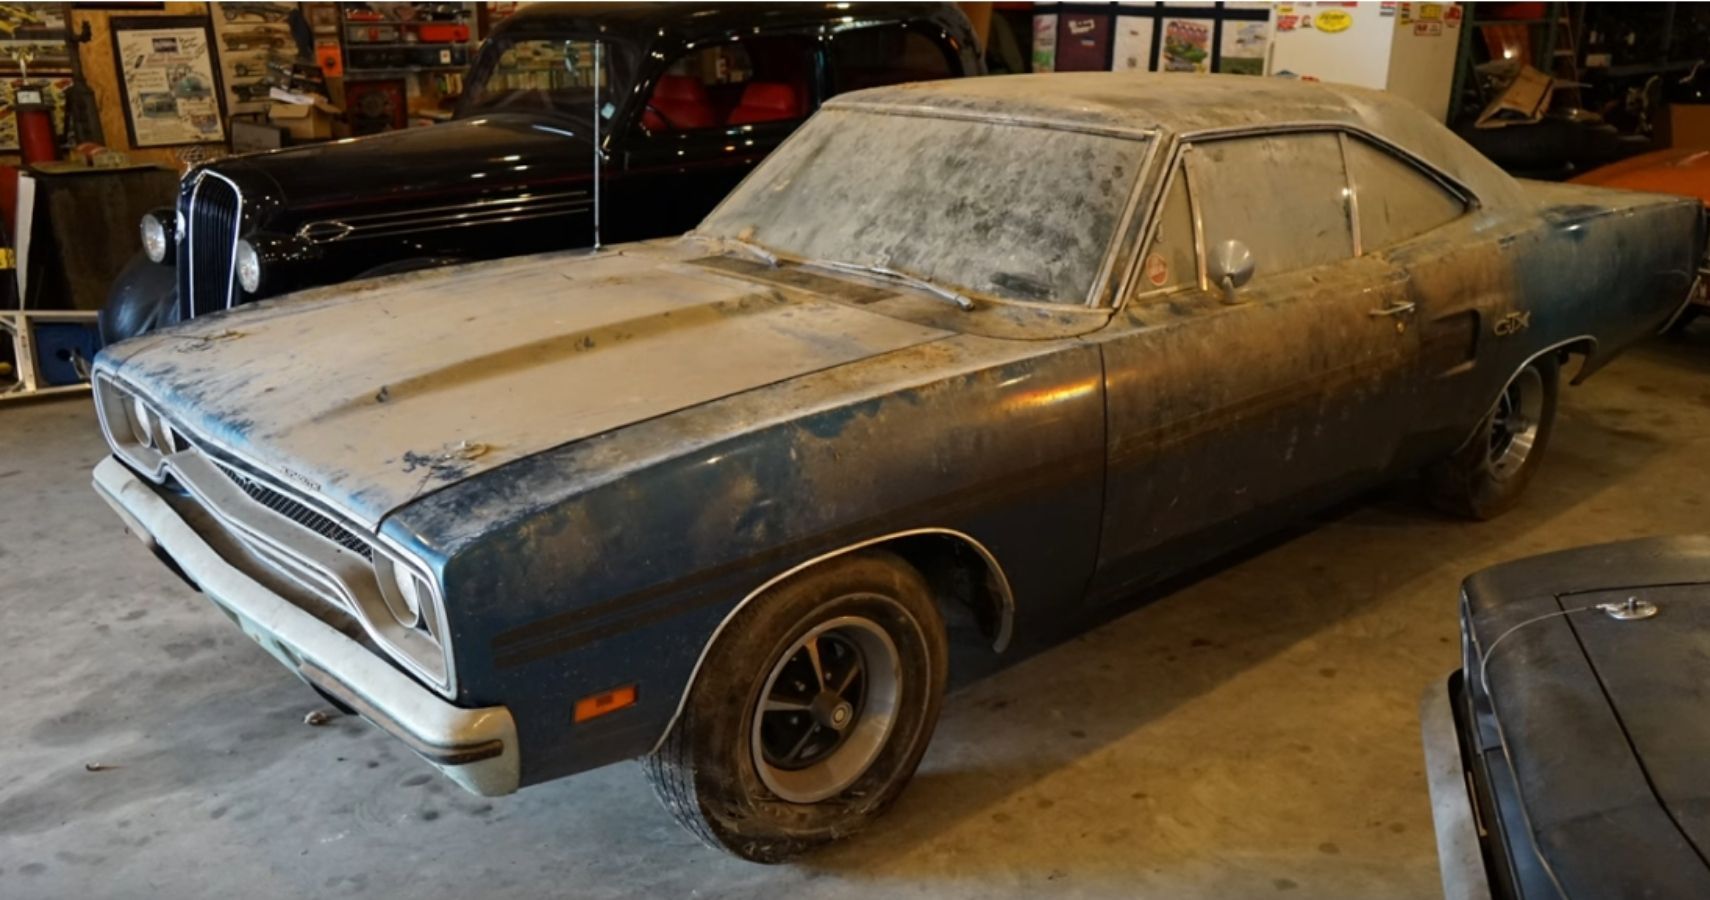 Before And After Footage Shows Plymouth GTX Barn Find's Dramatic Transformation